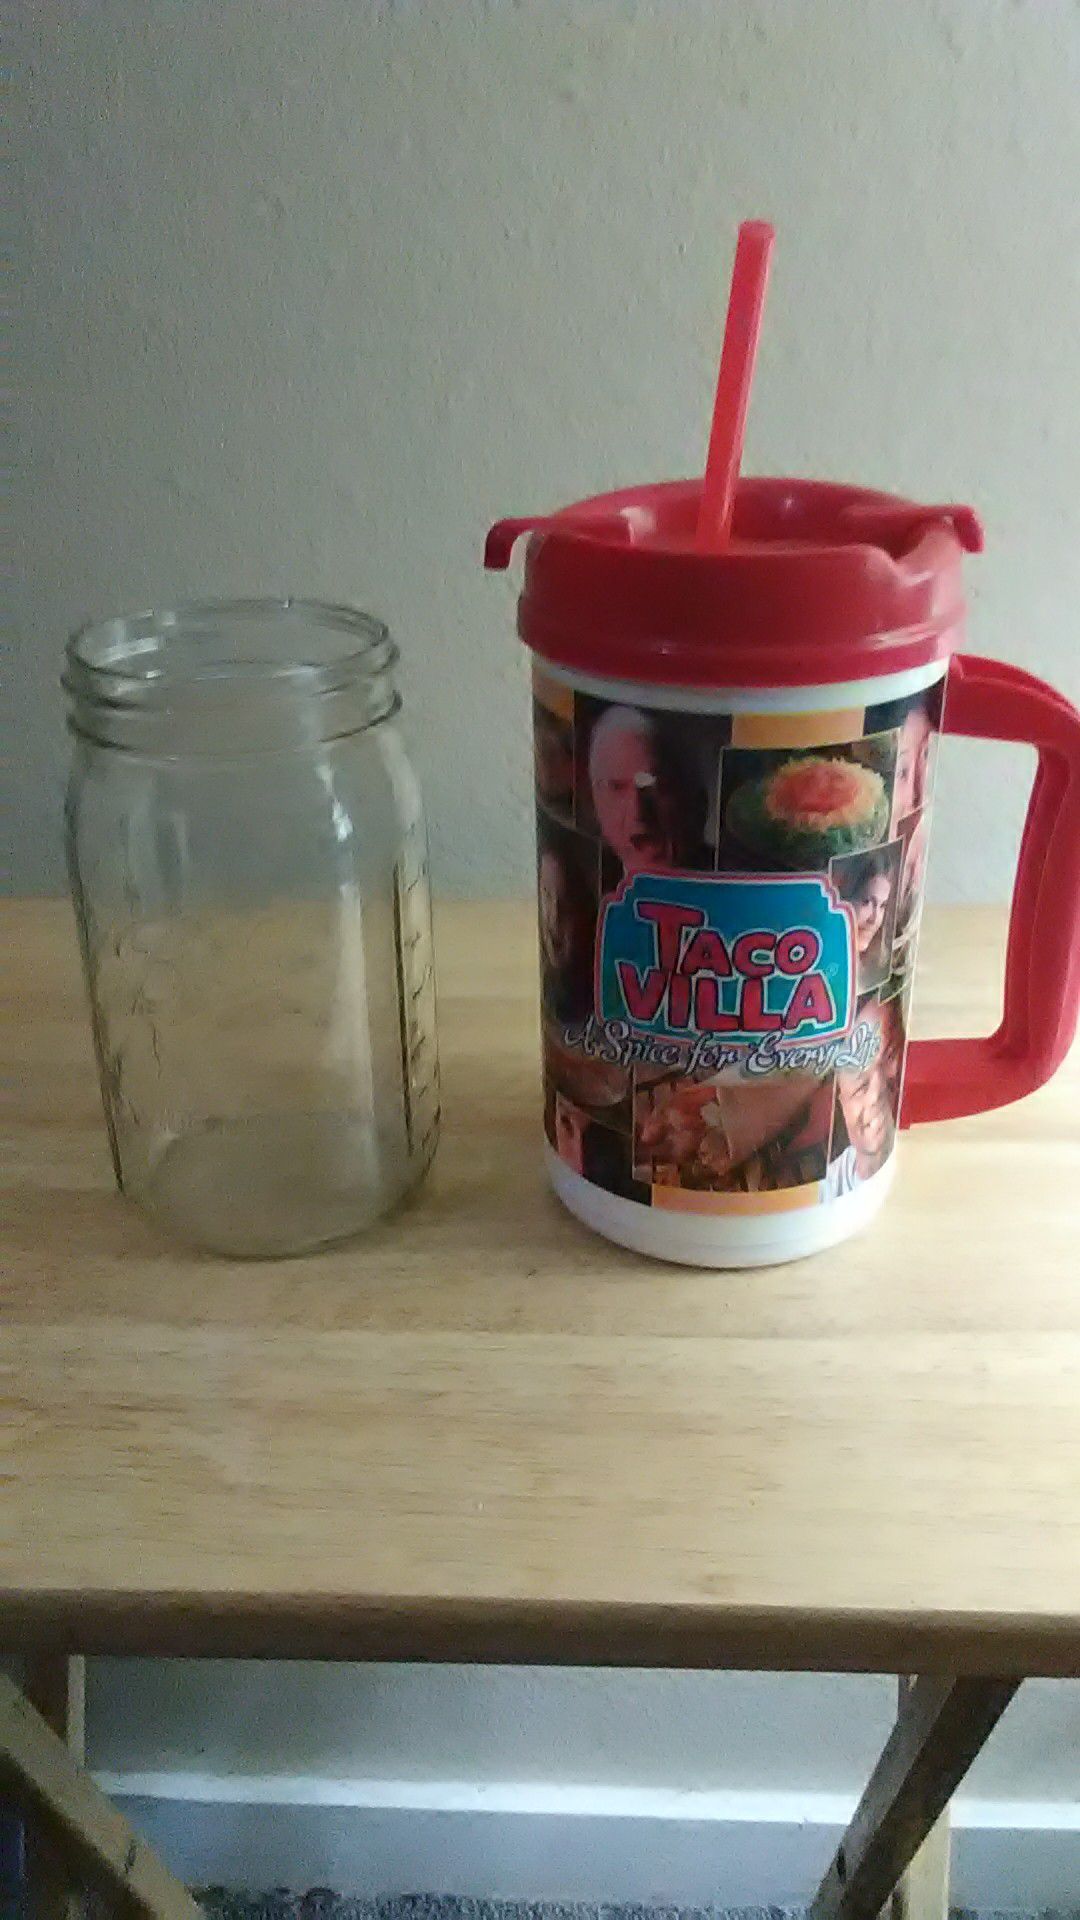 Yes I have six big mason jars they stand every bit as tall as a 32 announce fountain soda pop